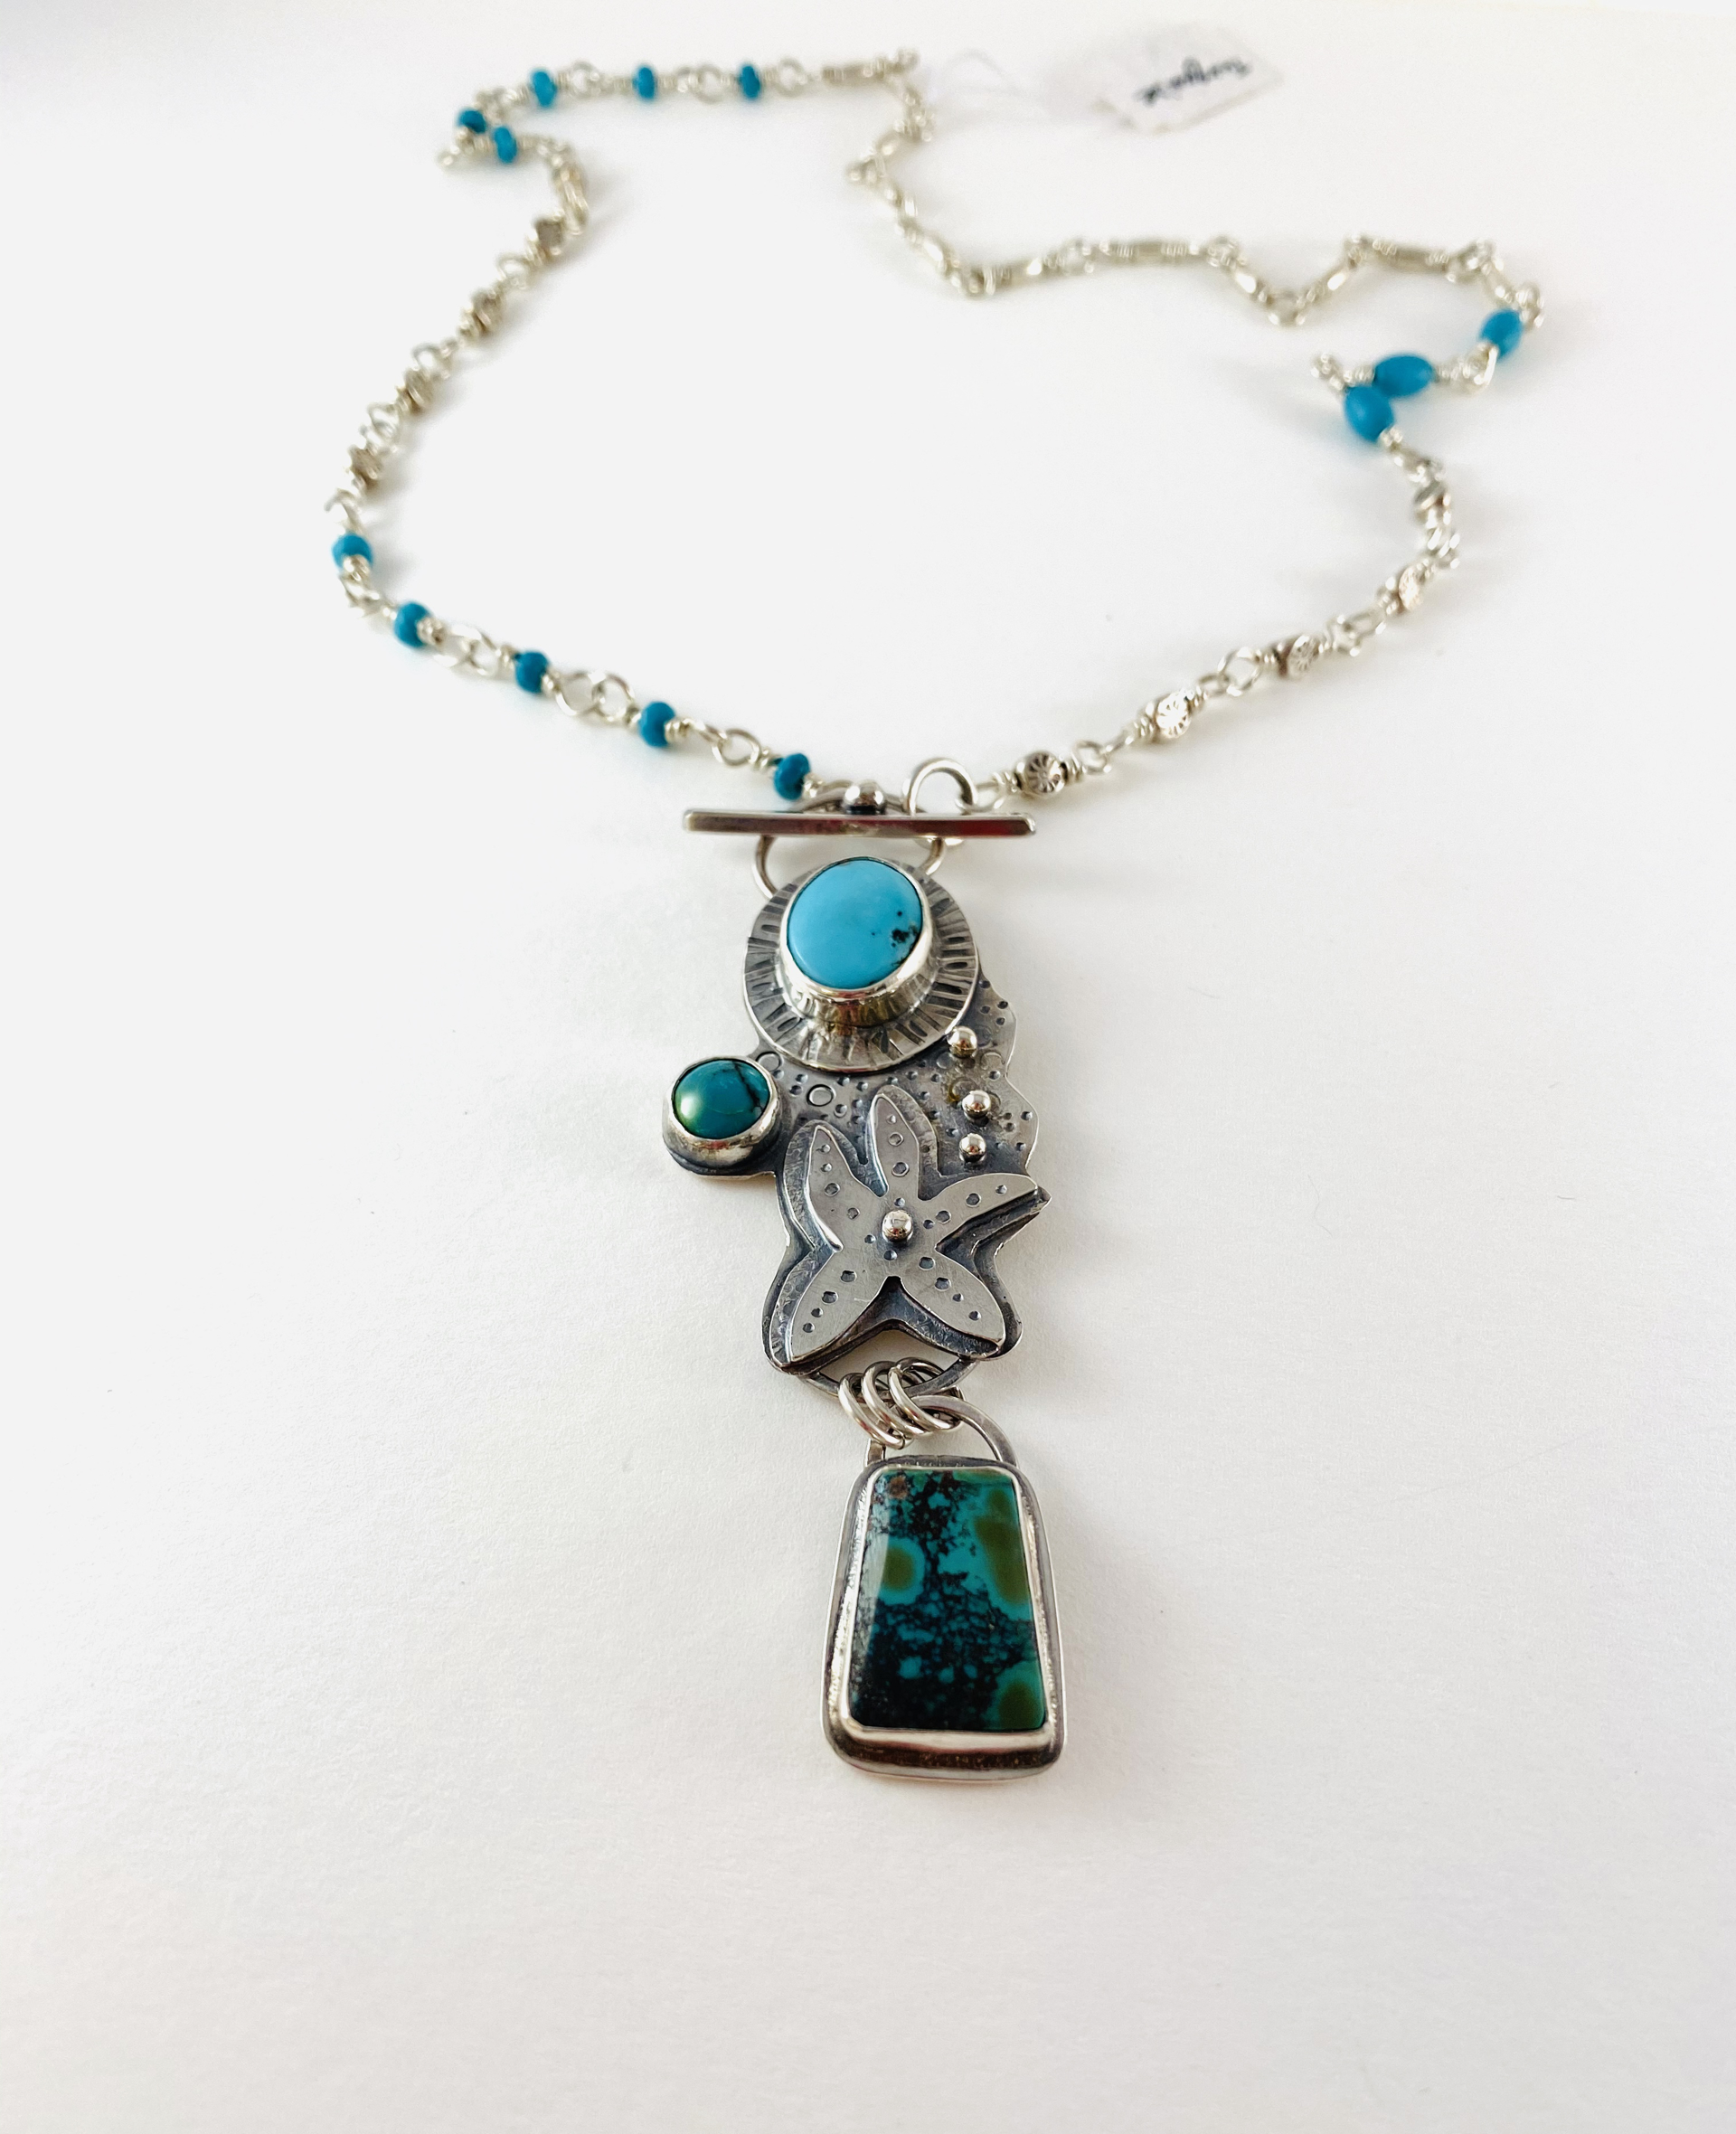 AB20-40 Starfish and Turquoise Pendant, Silver and Turquoise Bead Chain Necklace by Anne Bivens